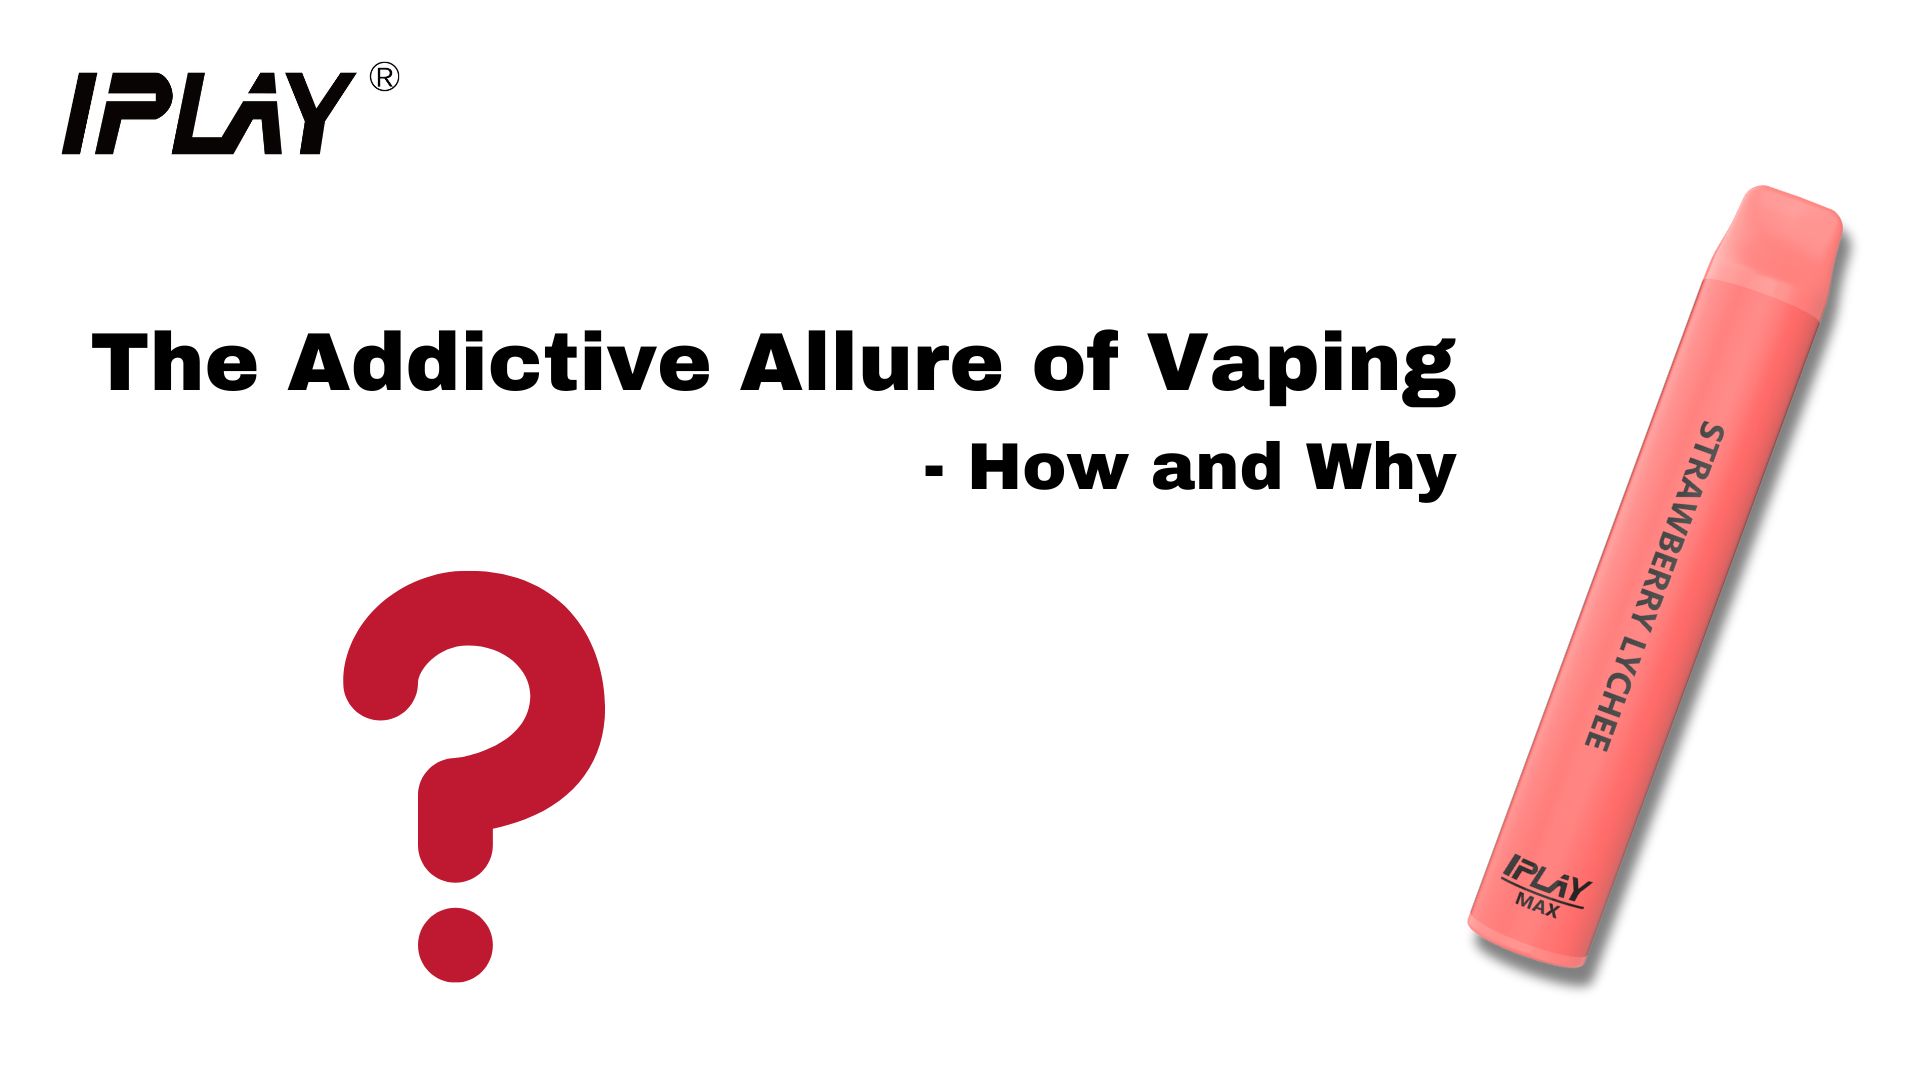 The Addictive Allure of Vaping: How and Why